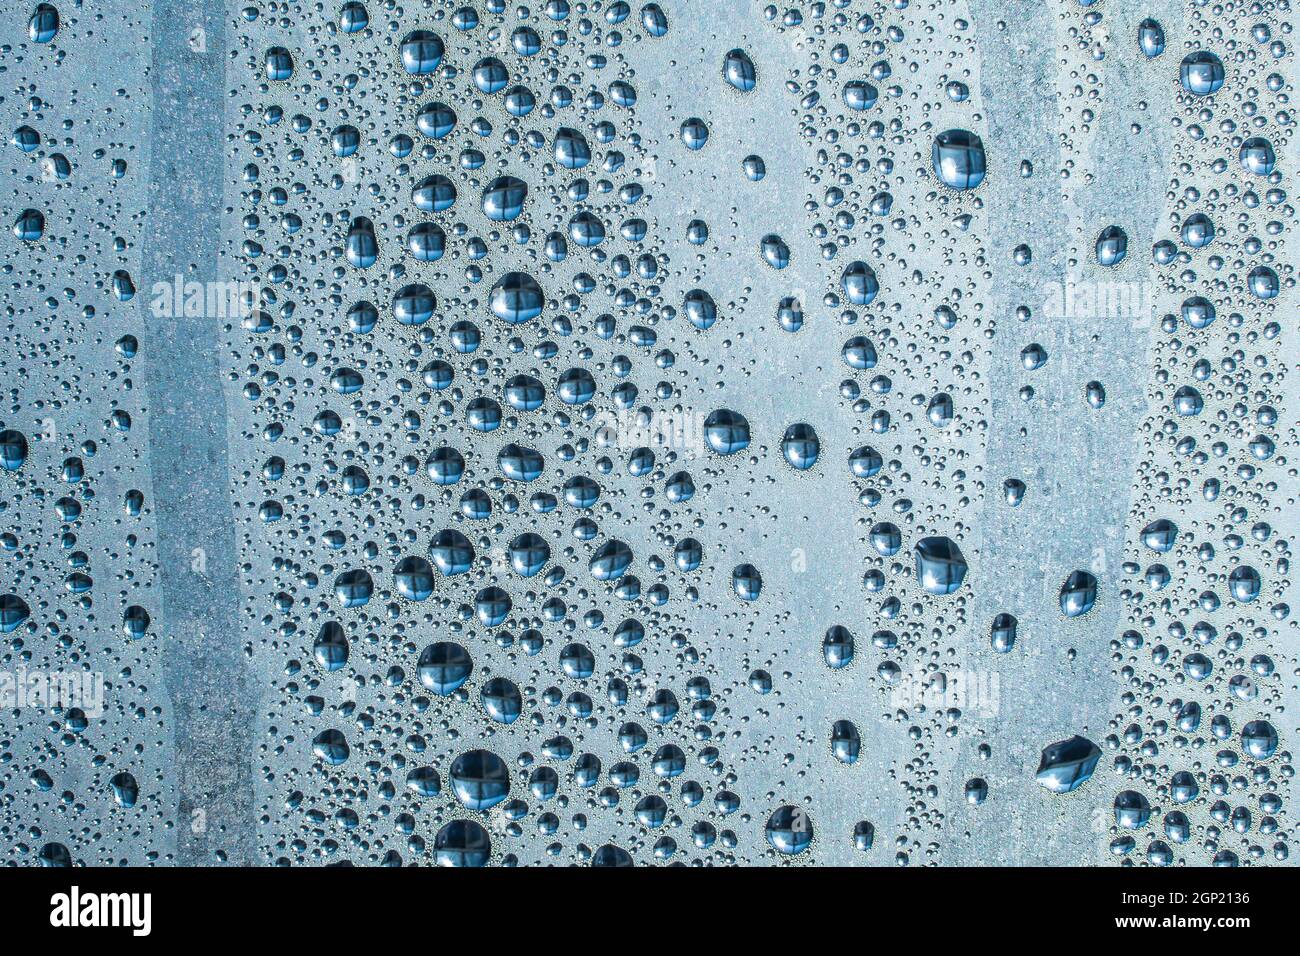 Abstract background ornament with water drops.Raindrops on the glass in rainy weather.The glittering, shiny surface of water on glass.Water drops in t Stock Photo